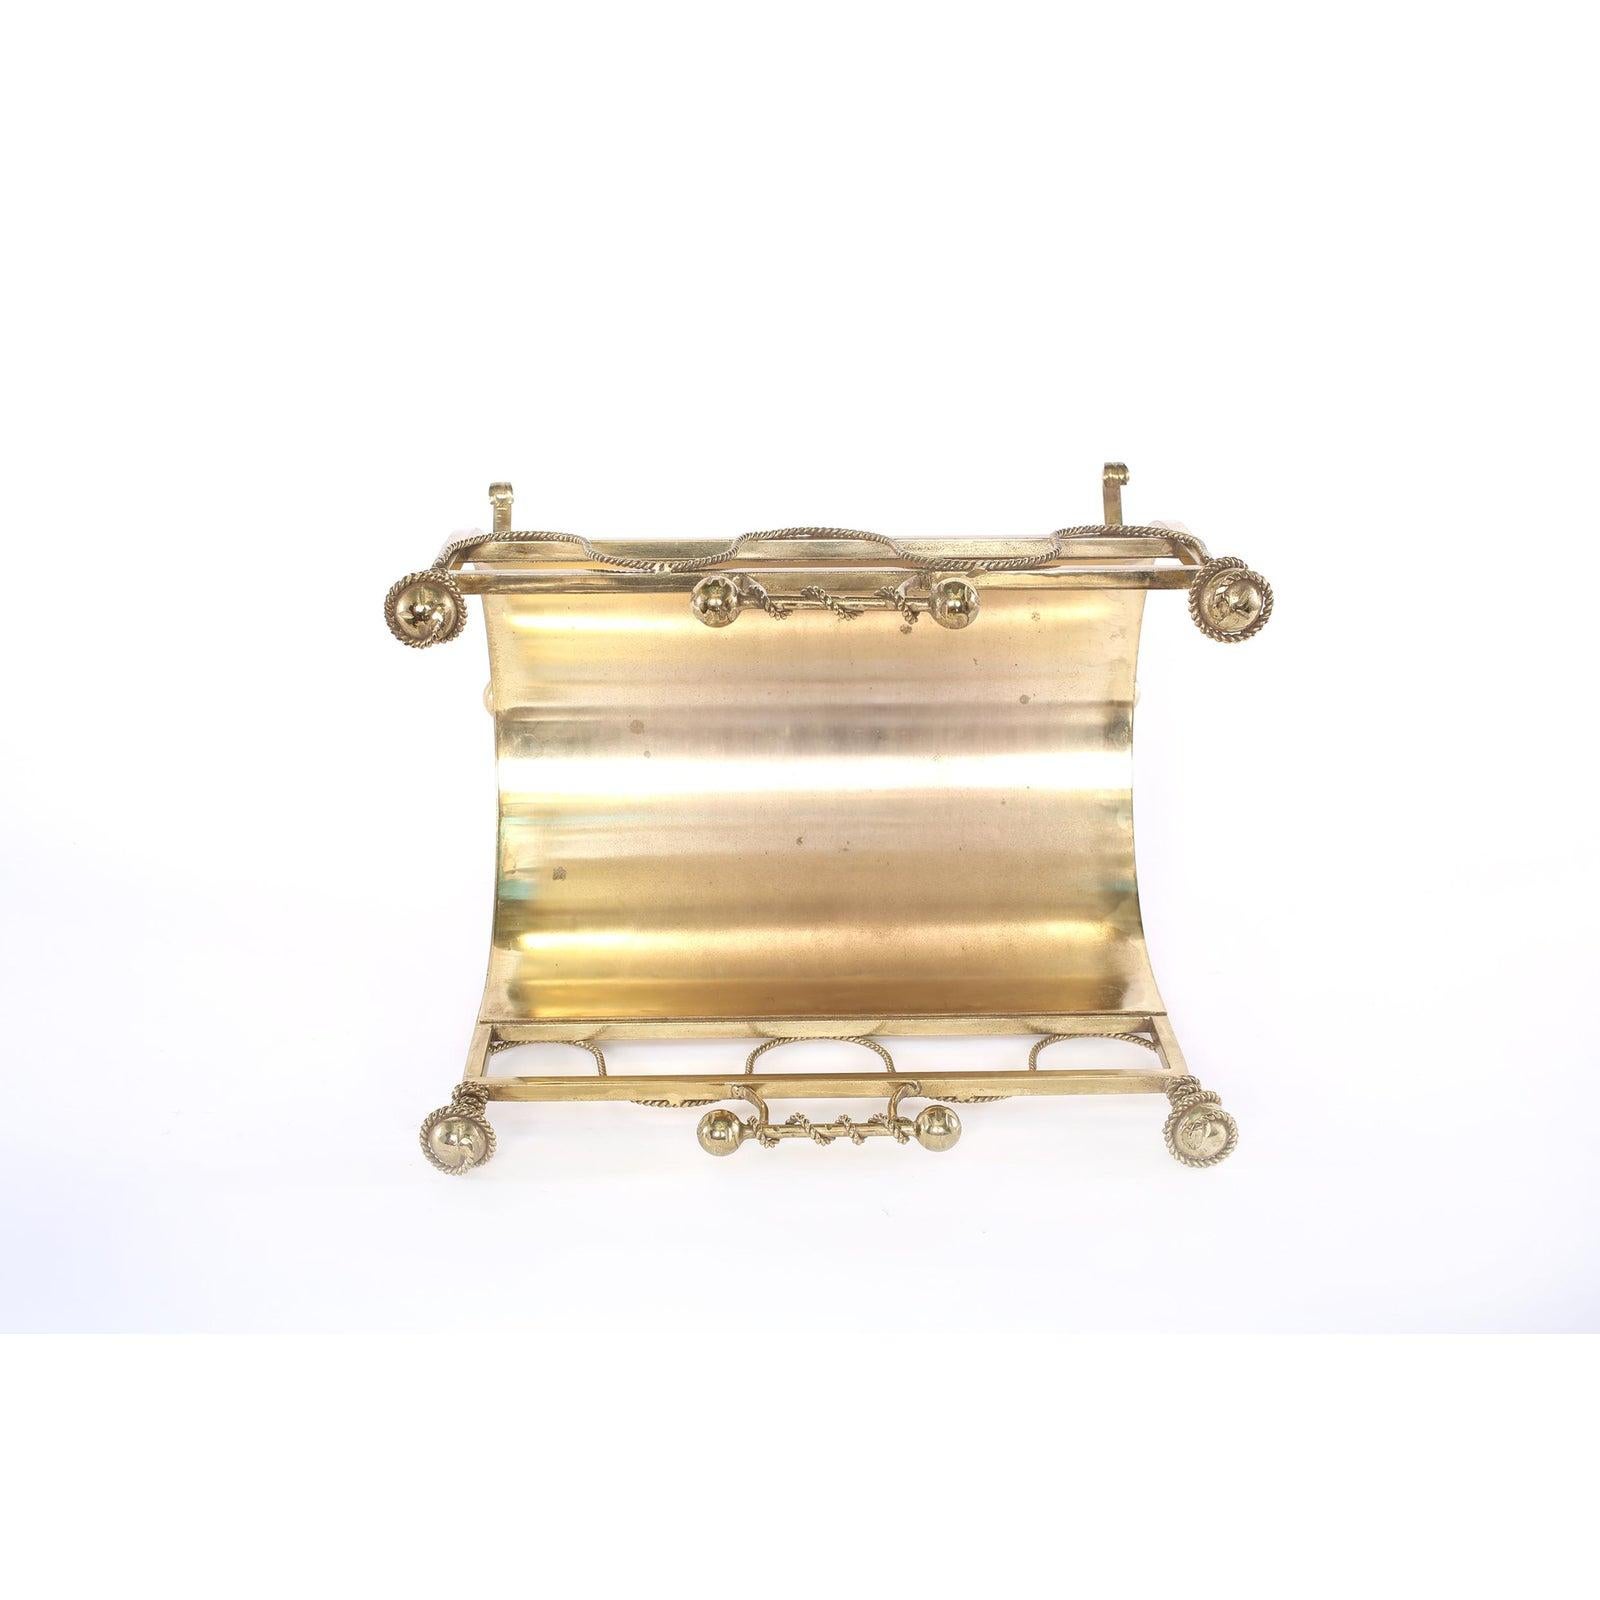 Footed solid brass fire logs holder with top handles & exterior design details. The logs holder is very handsome and in great condition. Minor wear consistent with age / use. The piece stands about 17 inches high x 13 inches deep x 19 inches wide.